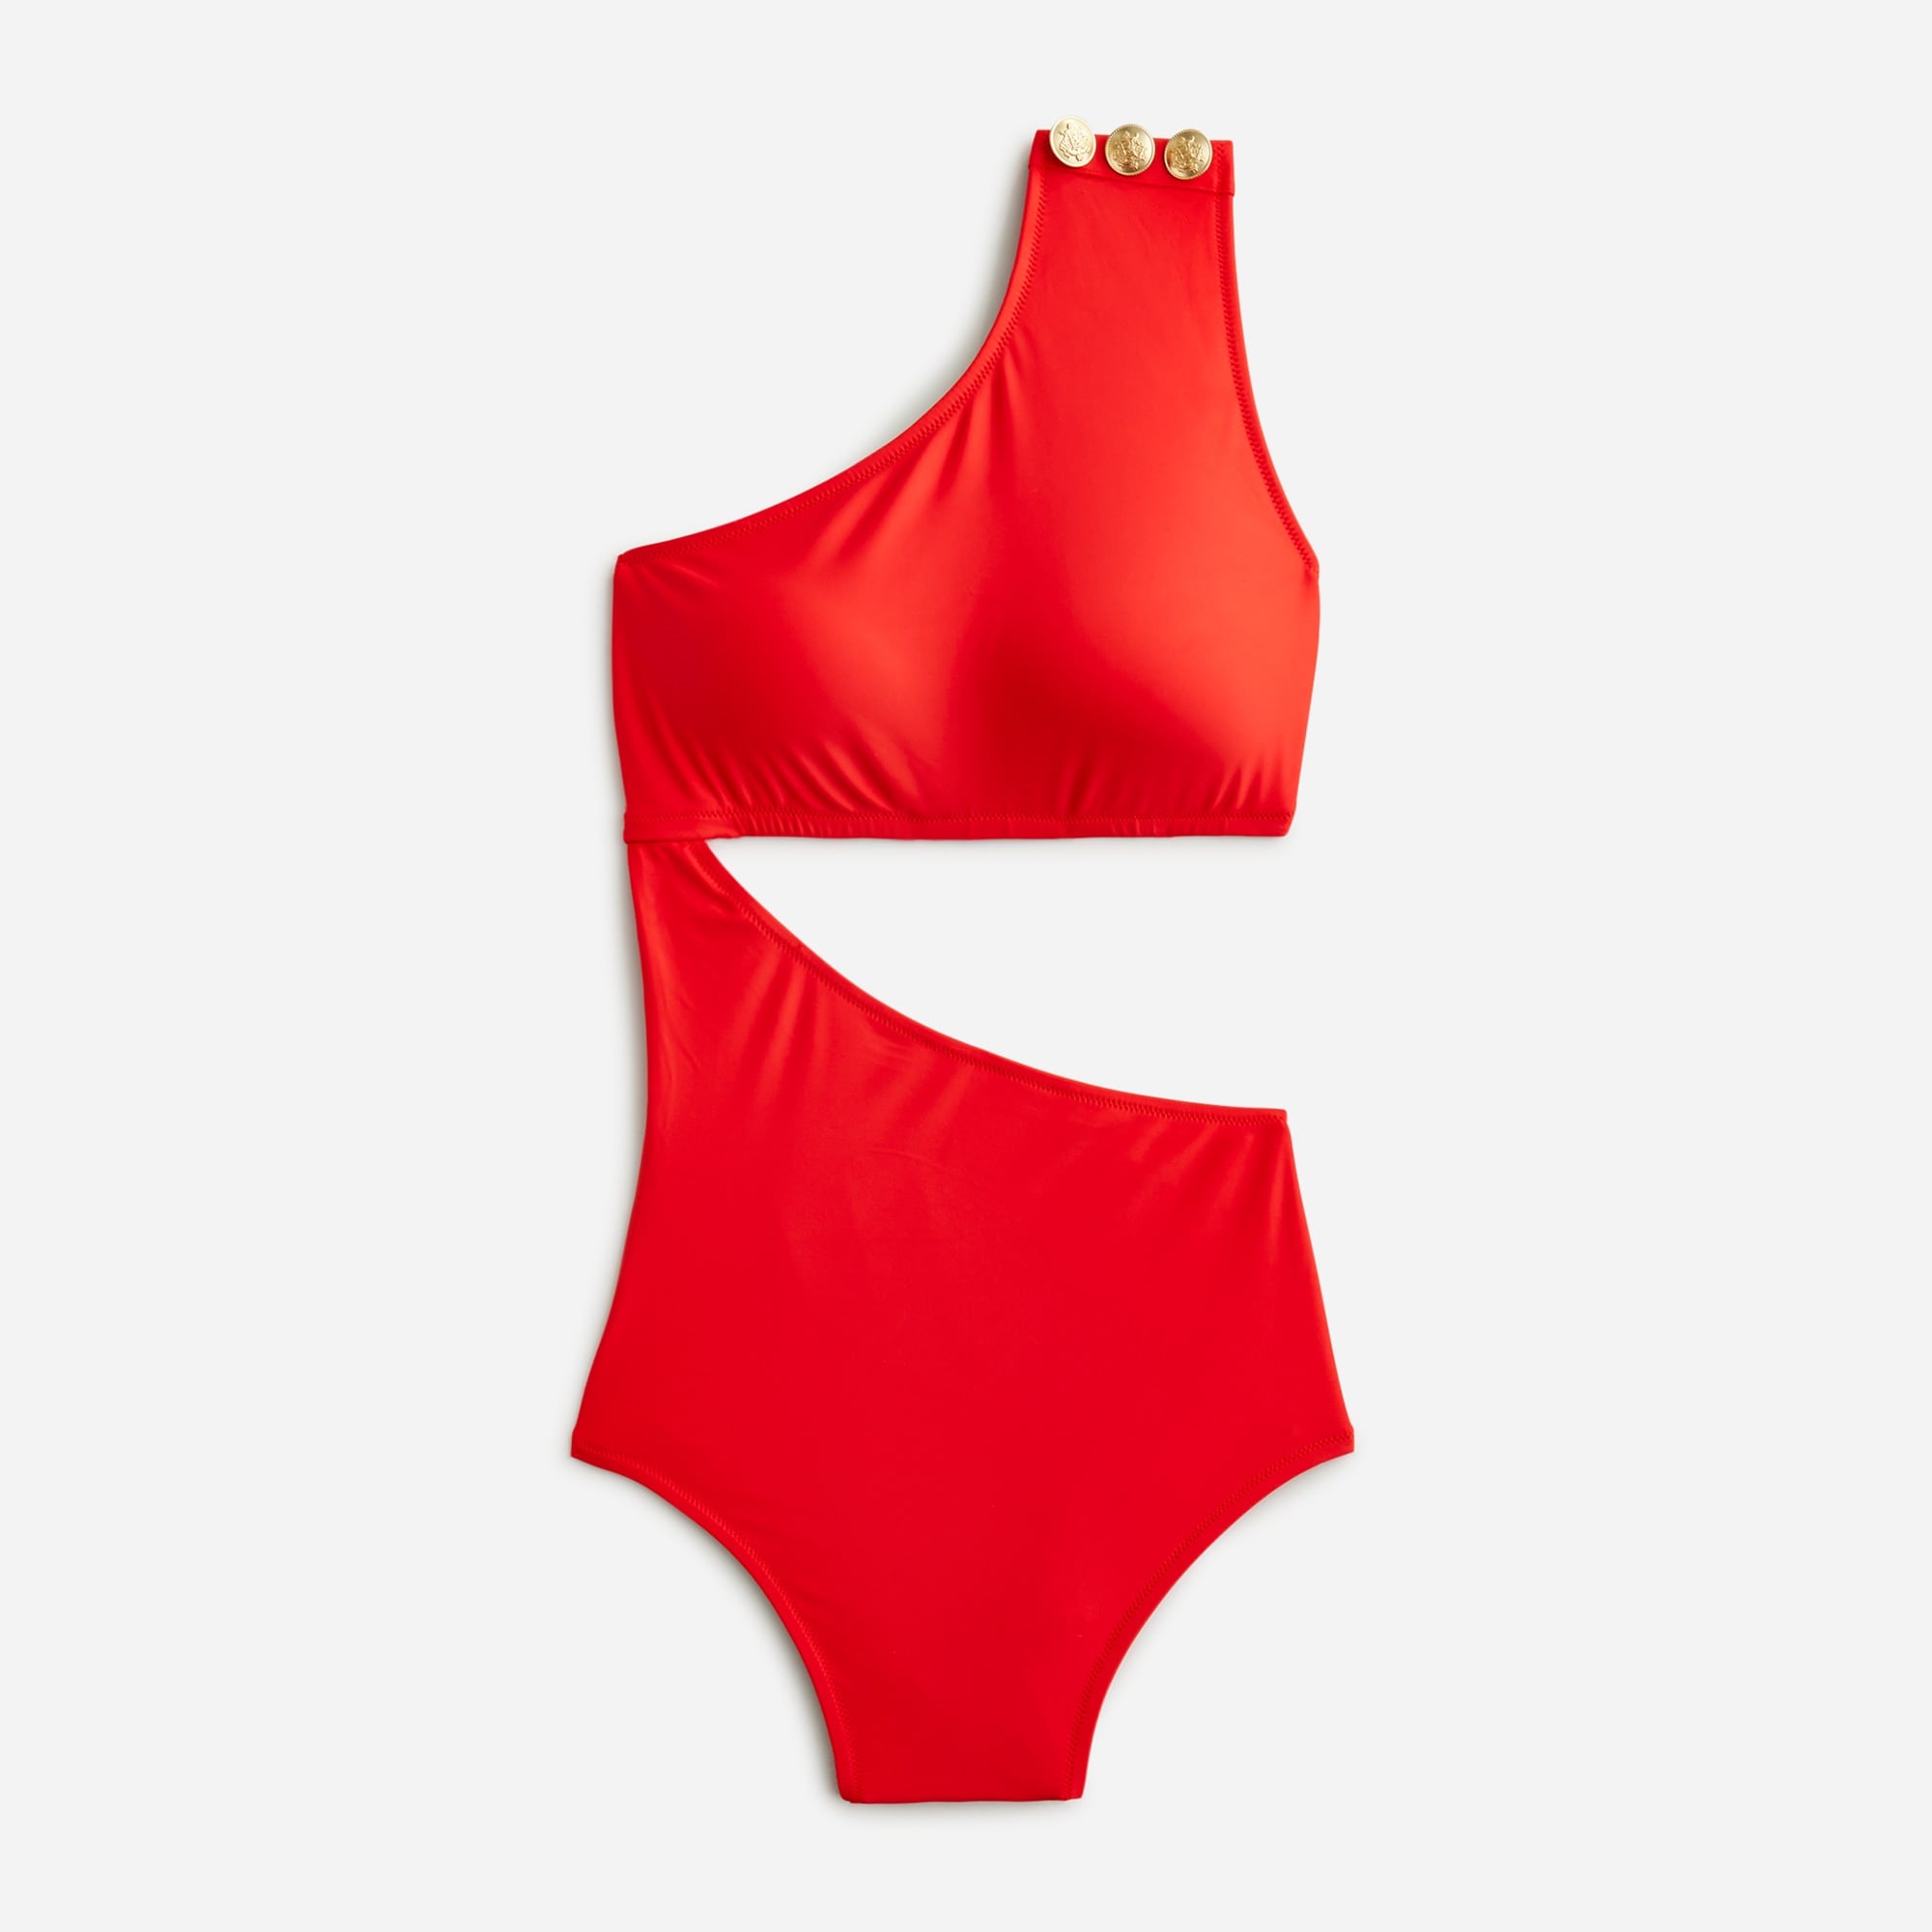 Cutout one-piece full-coverage swimsuit with buttons